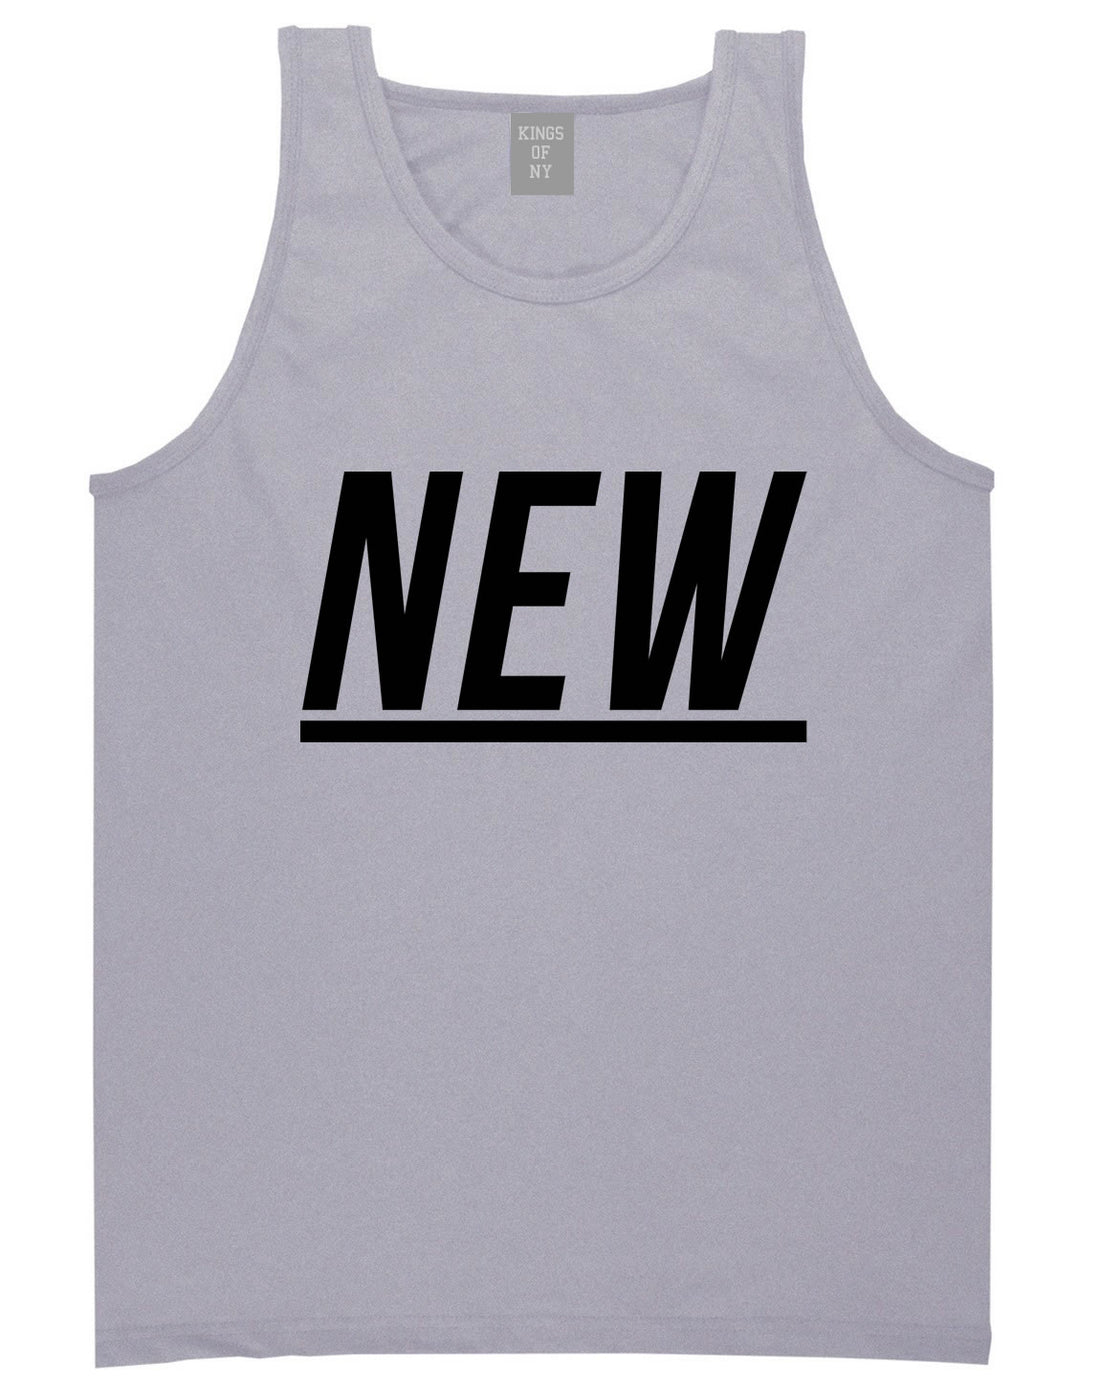 New Tank Top in Grey by Kings Of NY